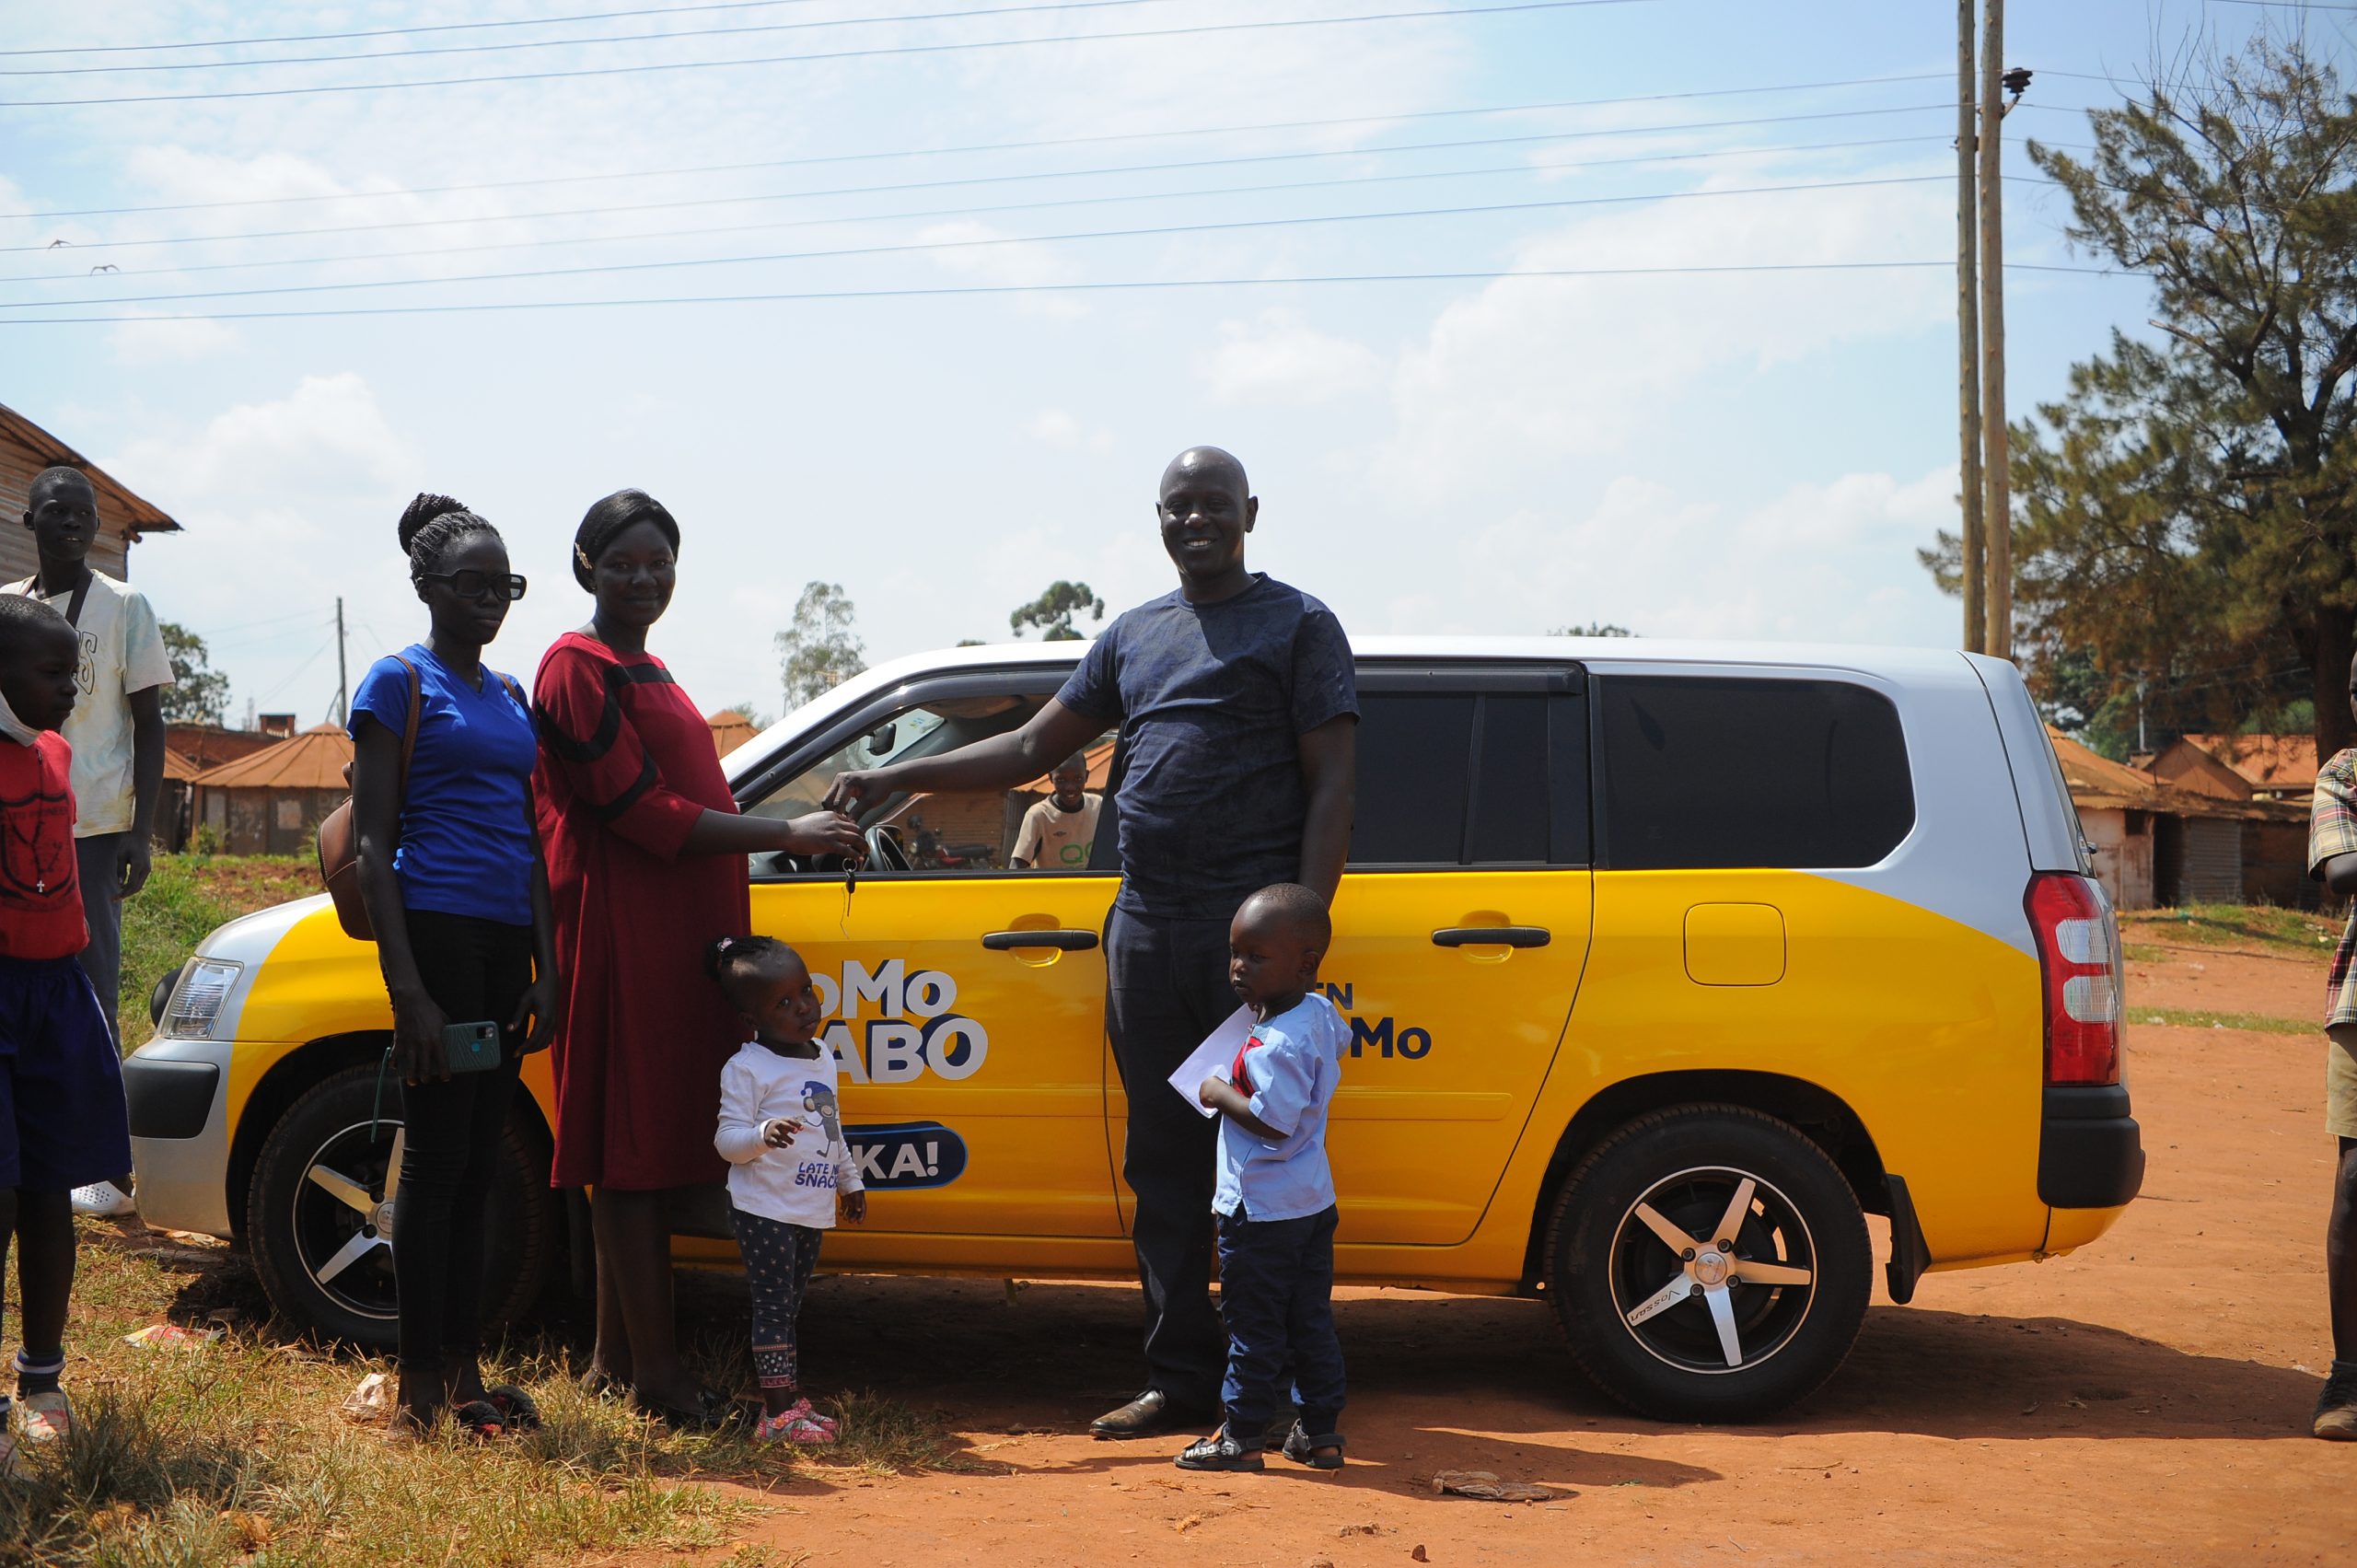 Celebrations Continue as MTN MoMo Nyabo Winners Receive Brand New Toyota Succeed Cars